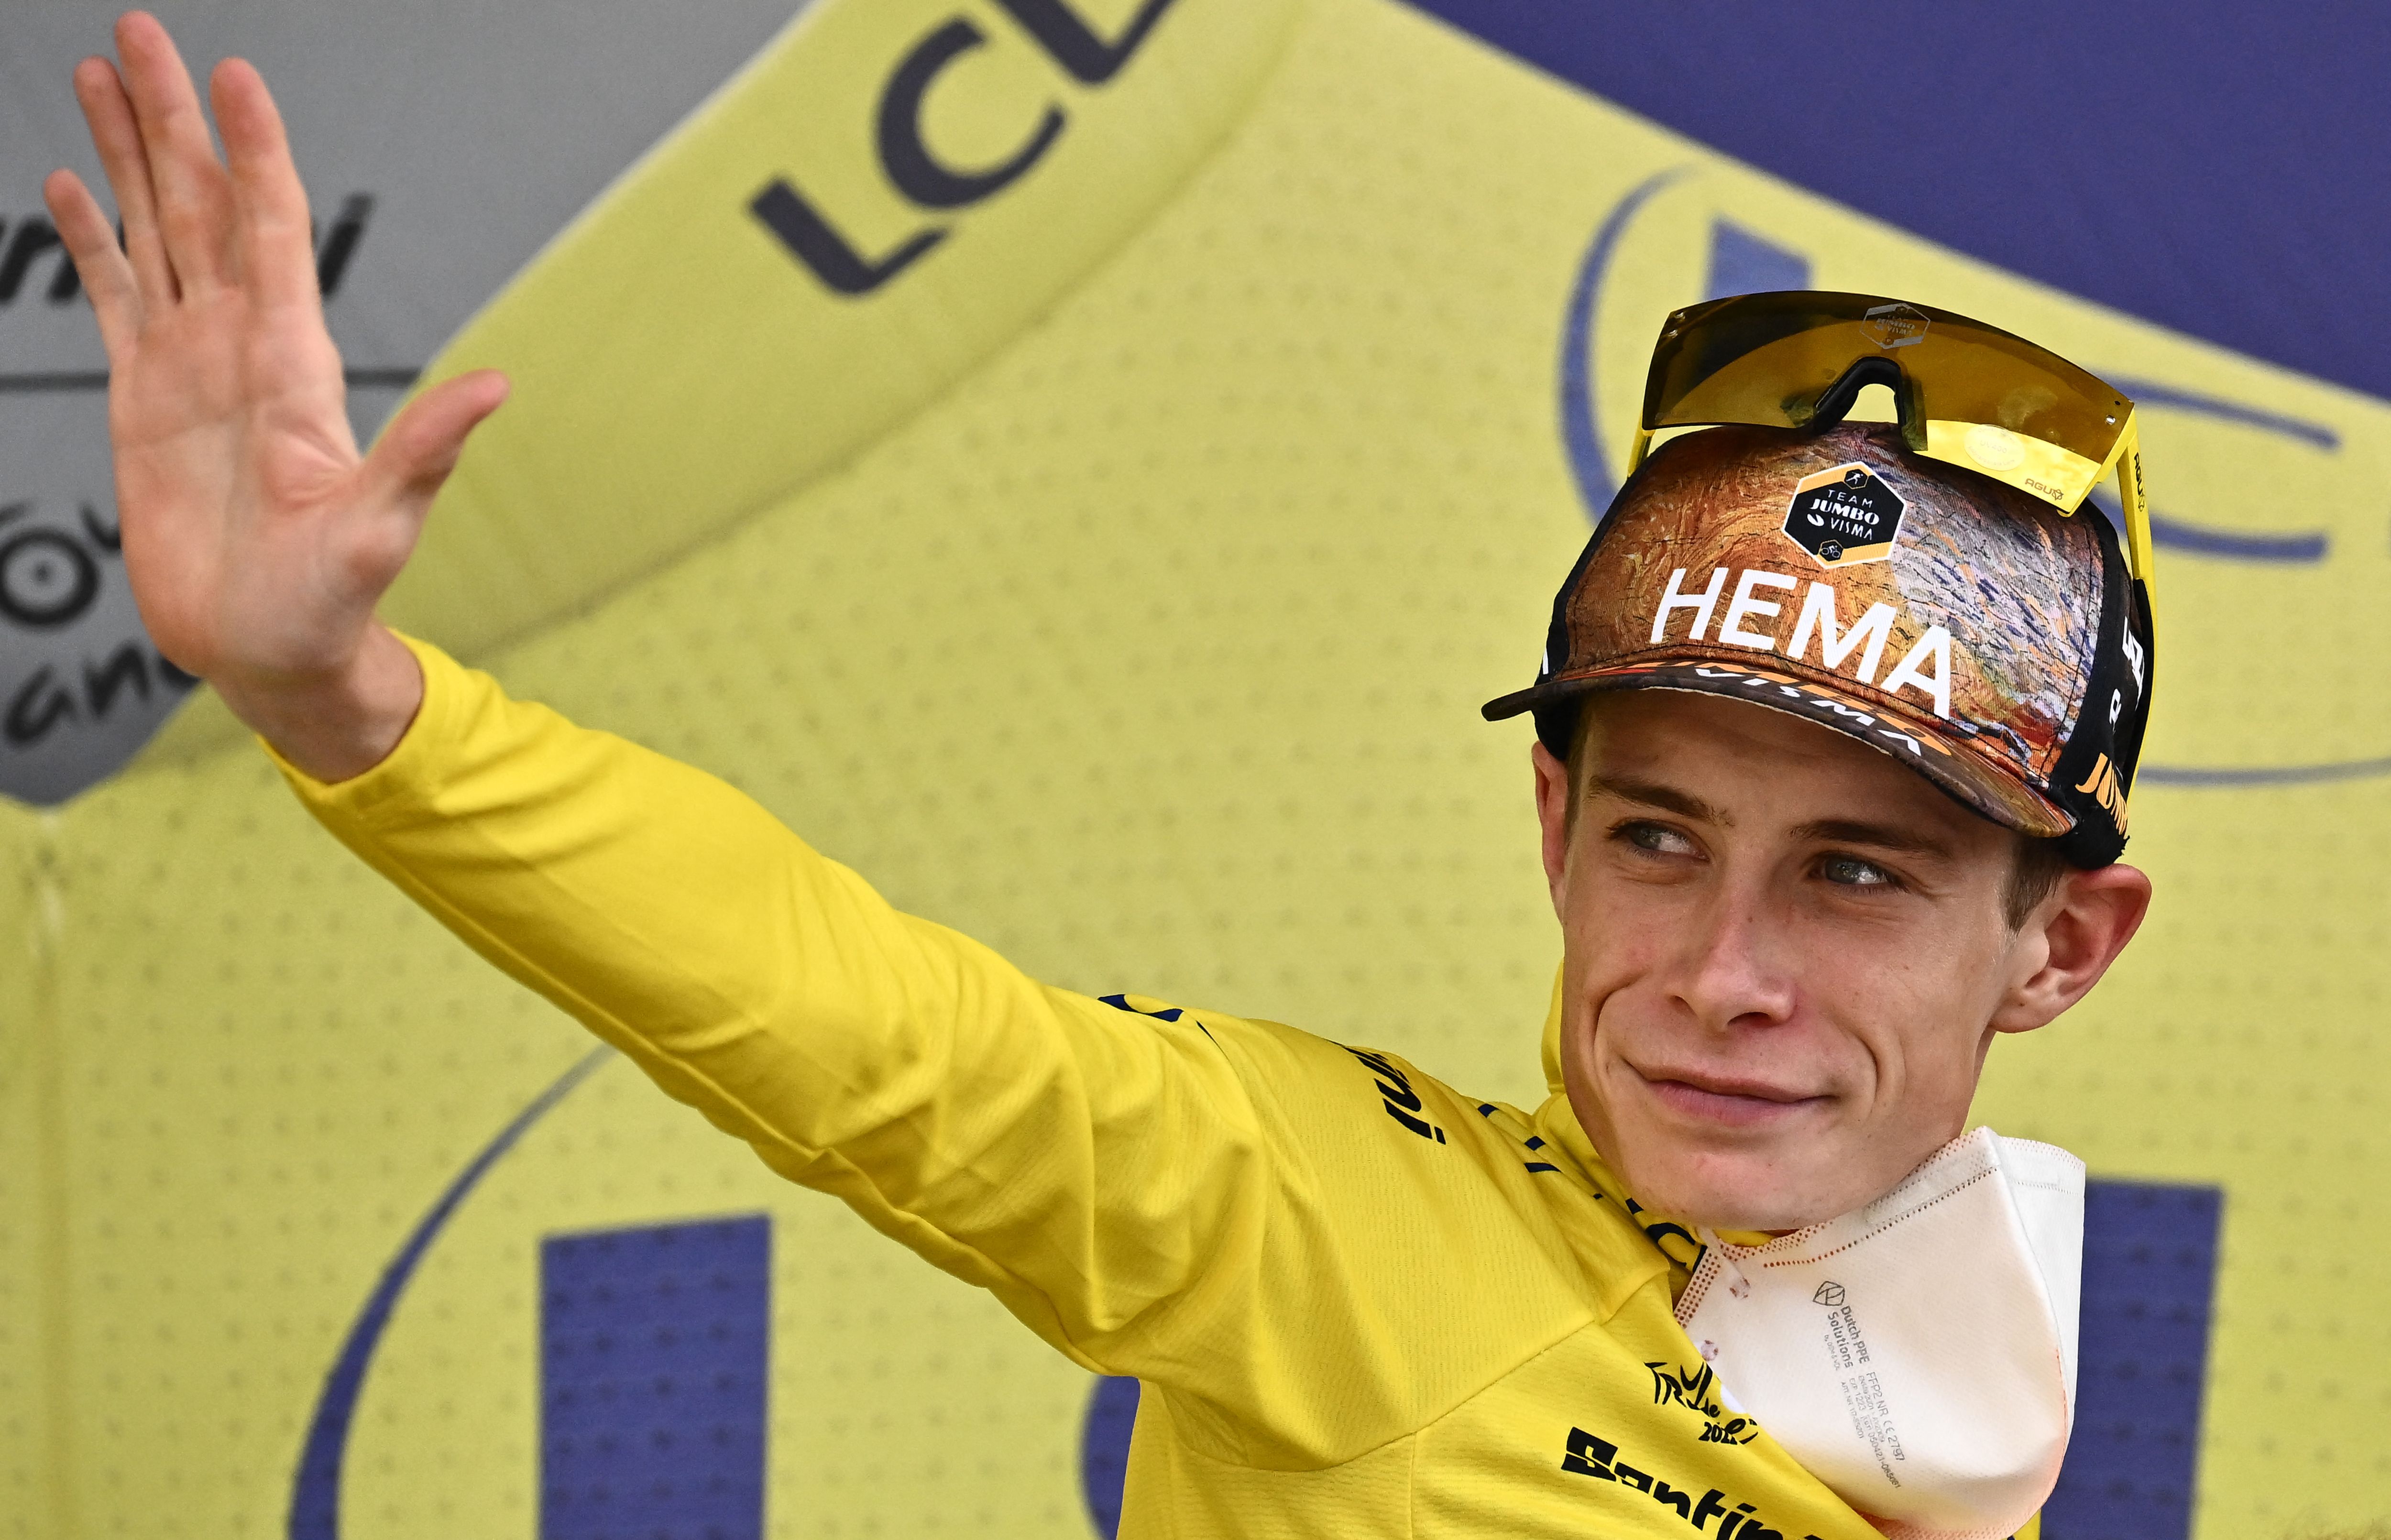 Jumbo-Visma team’s Danish rider Jonas Vingegaard celebrates on the podium with the overall leader’s yellow jersey after the 17th stage of the 109th edition of the Tour de France cycling race, 129,7 km between Saint-Gaudens and Peyragudes, in southwestern France, on July 20, 2022.